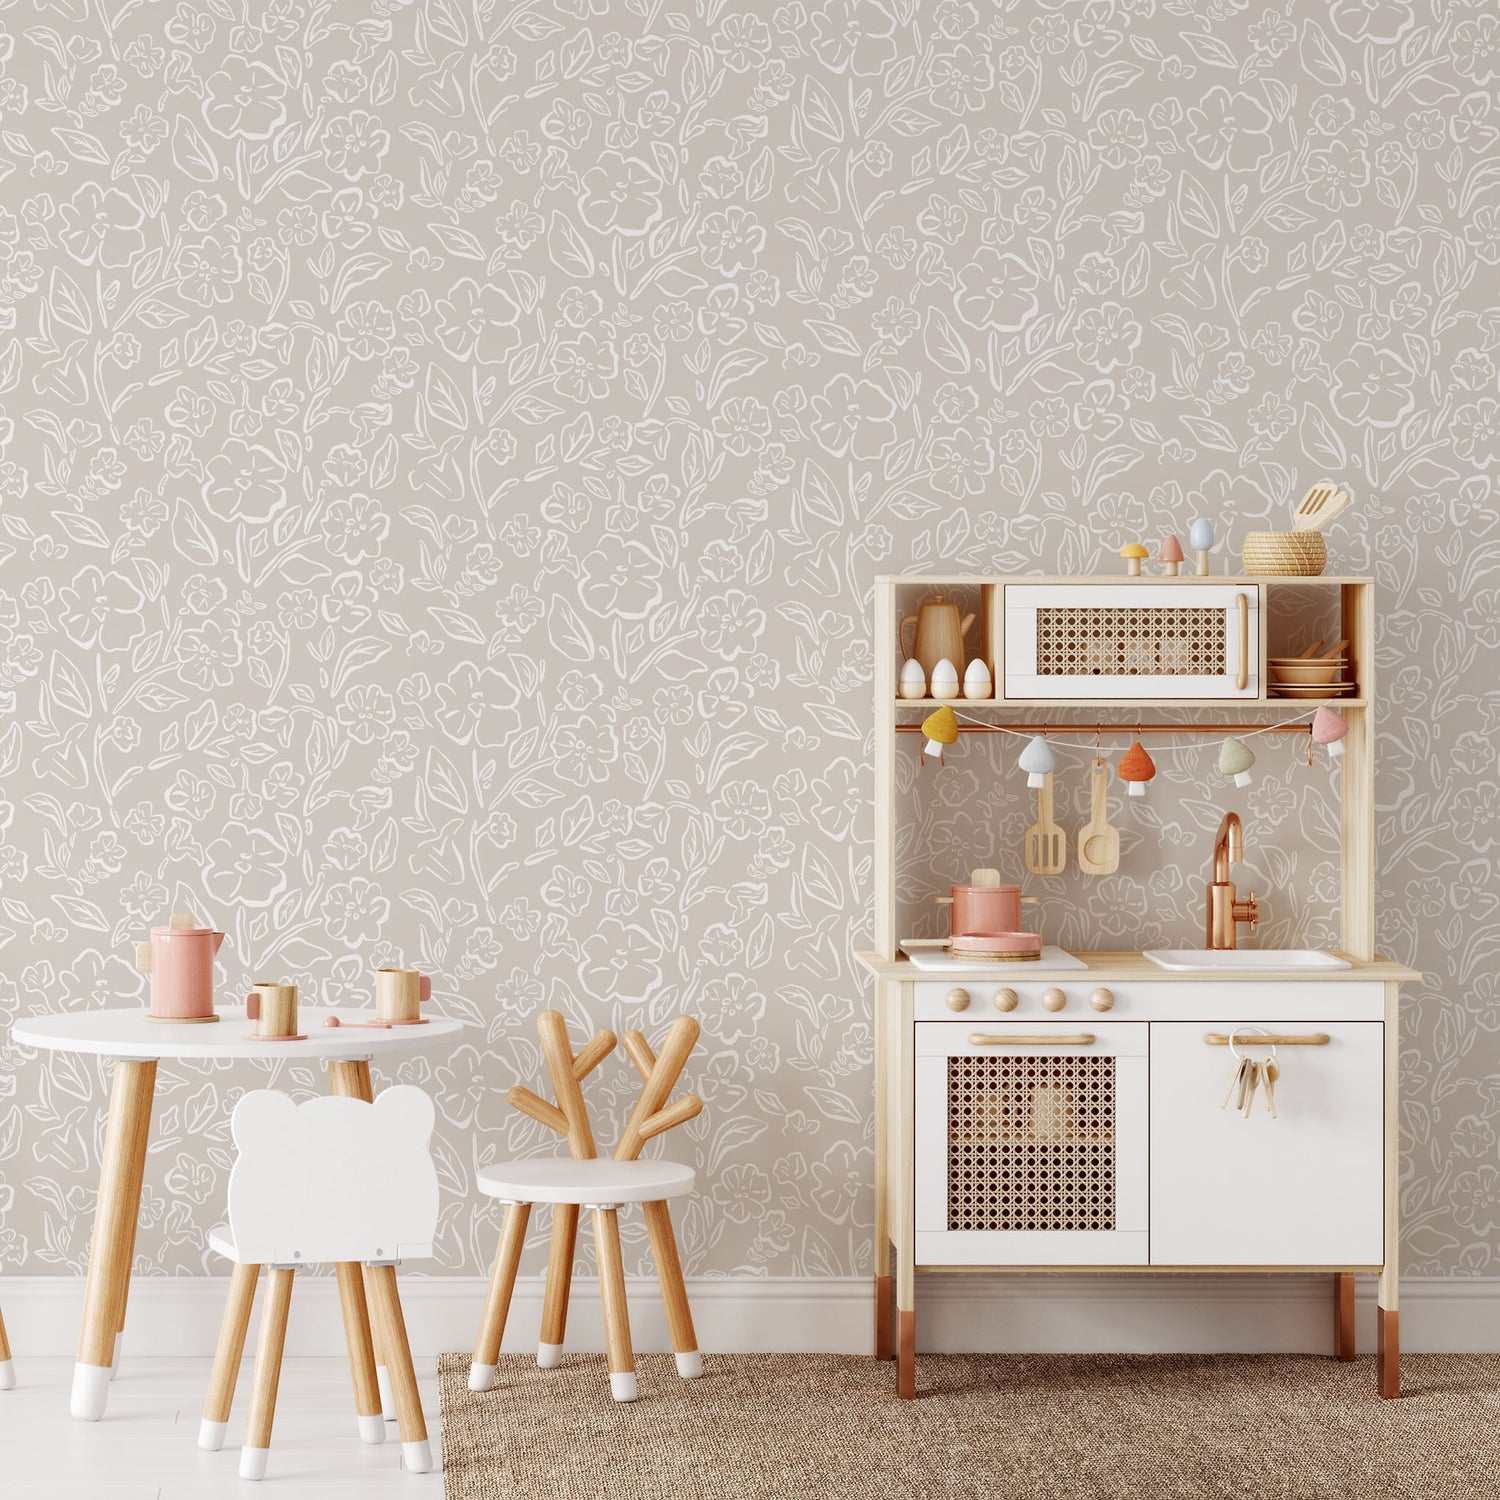 This Beverly Wallpaper in white on taupe offers a stylish and feminine touch with its delicate floral design wallpaper shown in a full size image.